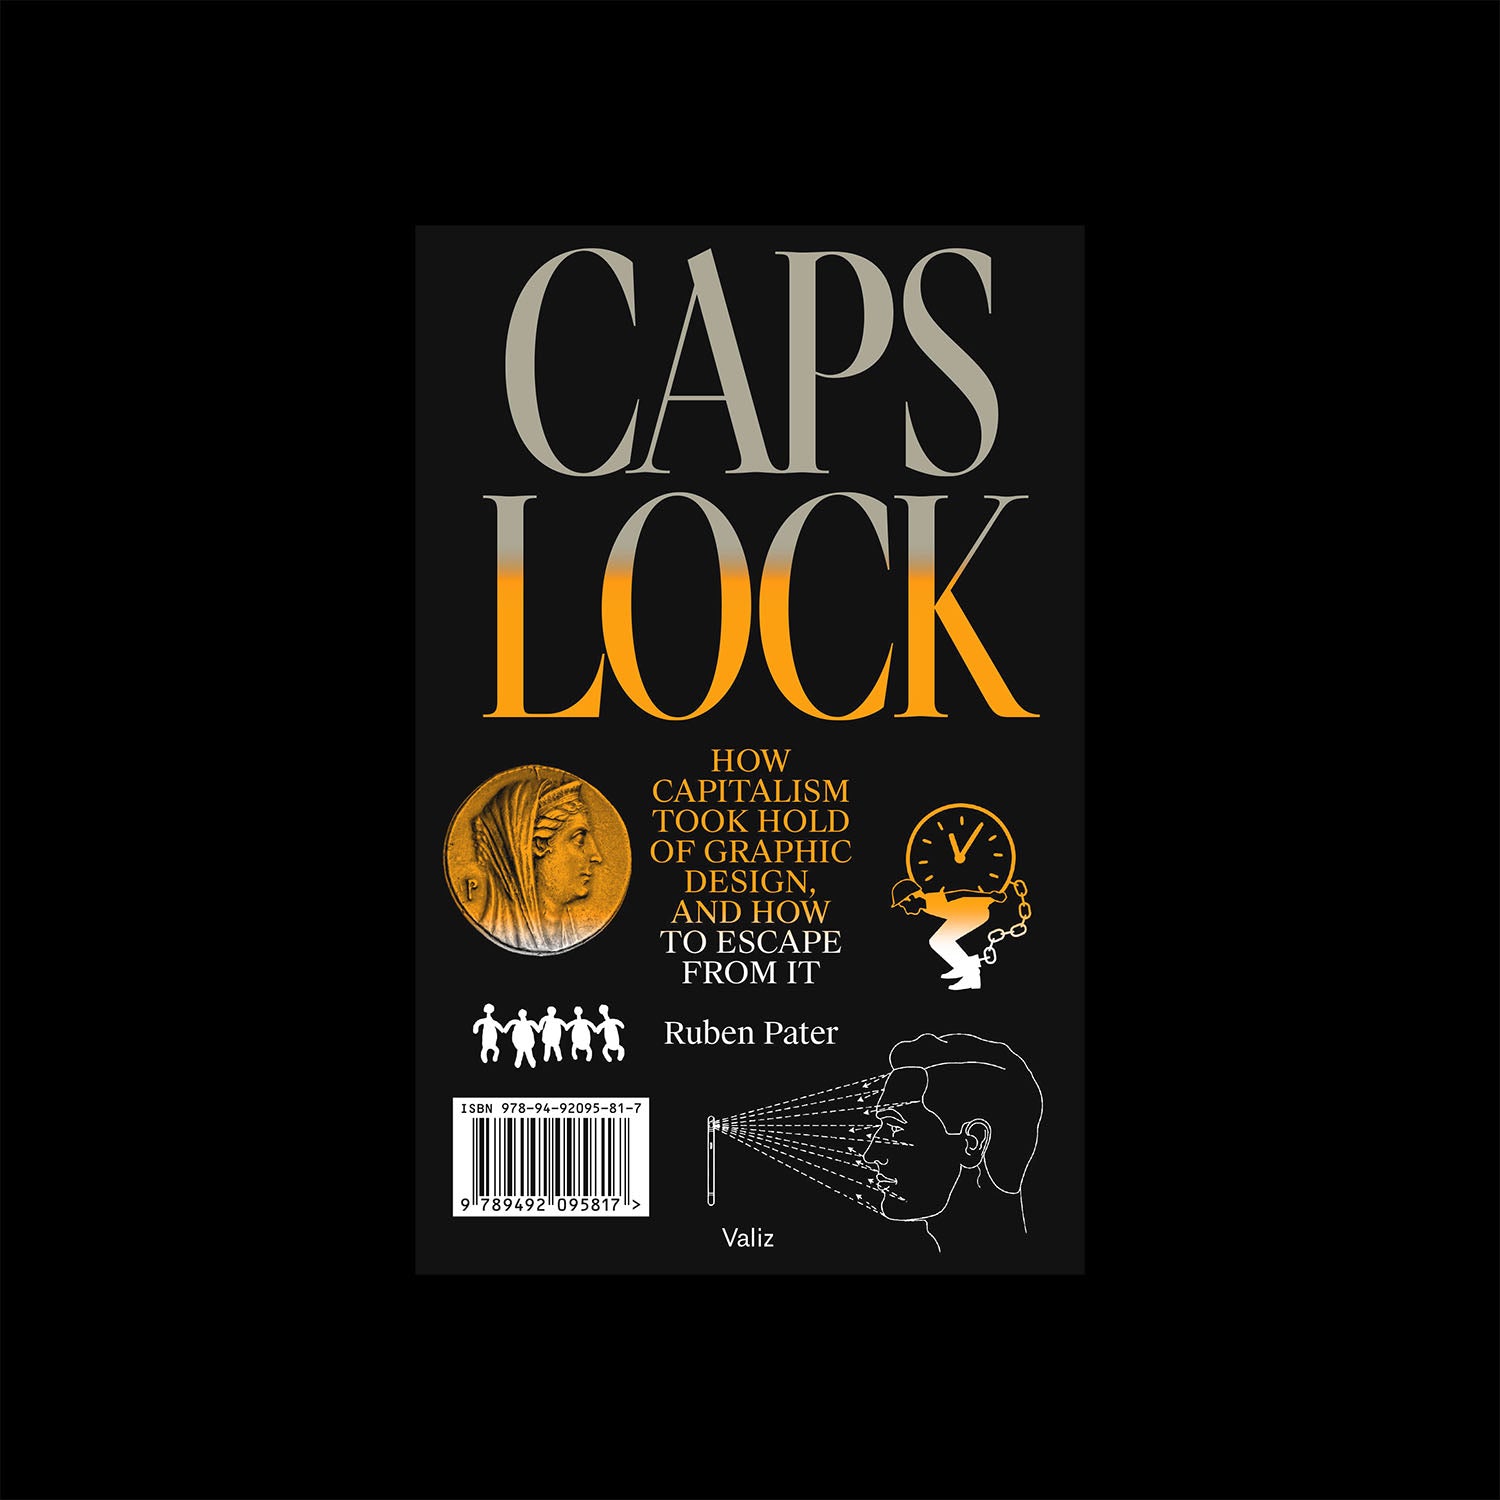 CAPS LOCK: How Capitalism Took Hold Of Graphic Design, And How To Escape From It – Ruben Pater